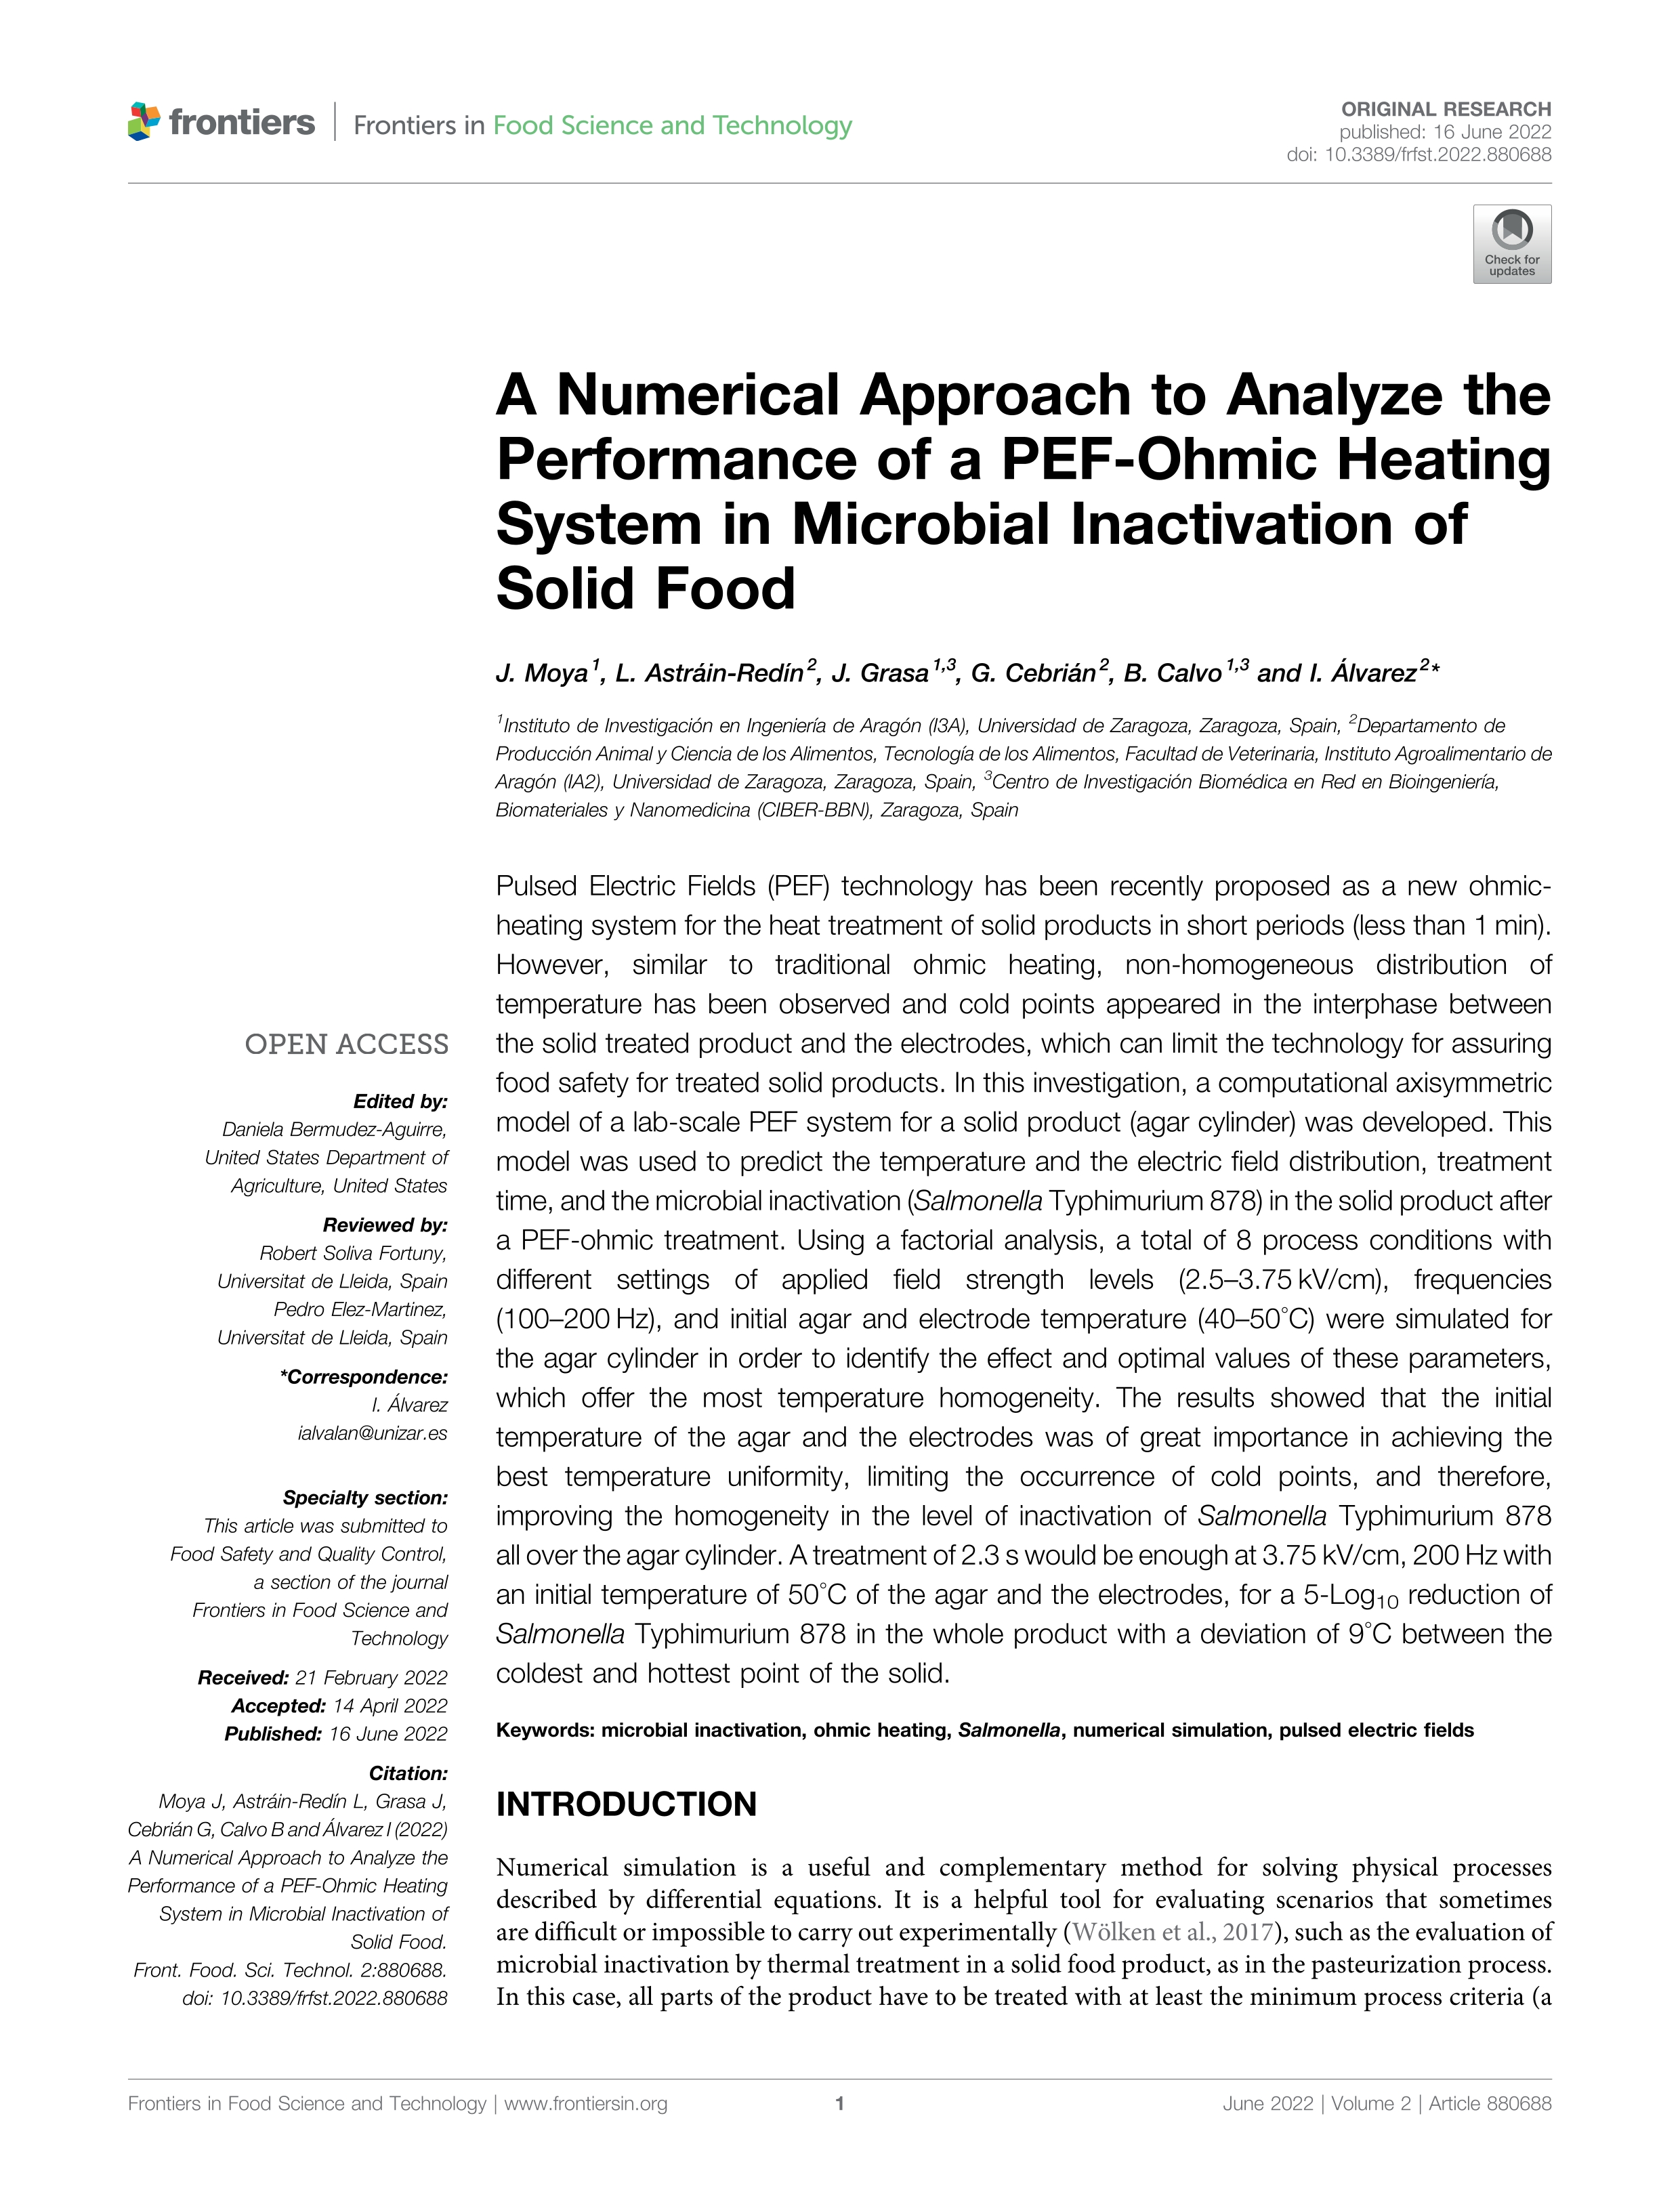 A numerical approach to analyze the performance of a PEF-Ohmic heating system in microbial inactivation of solid food